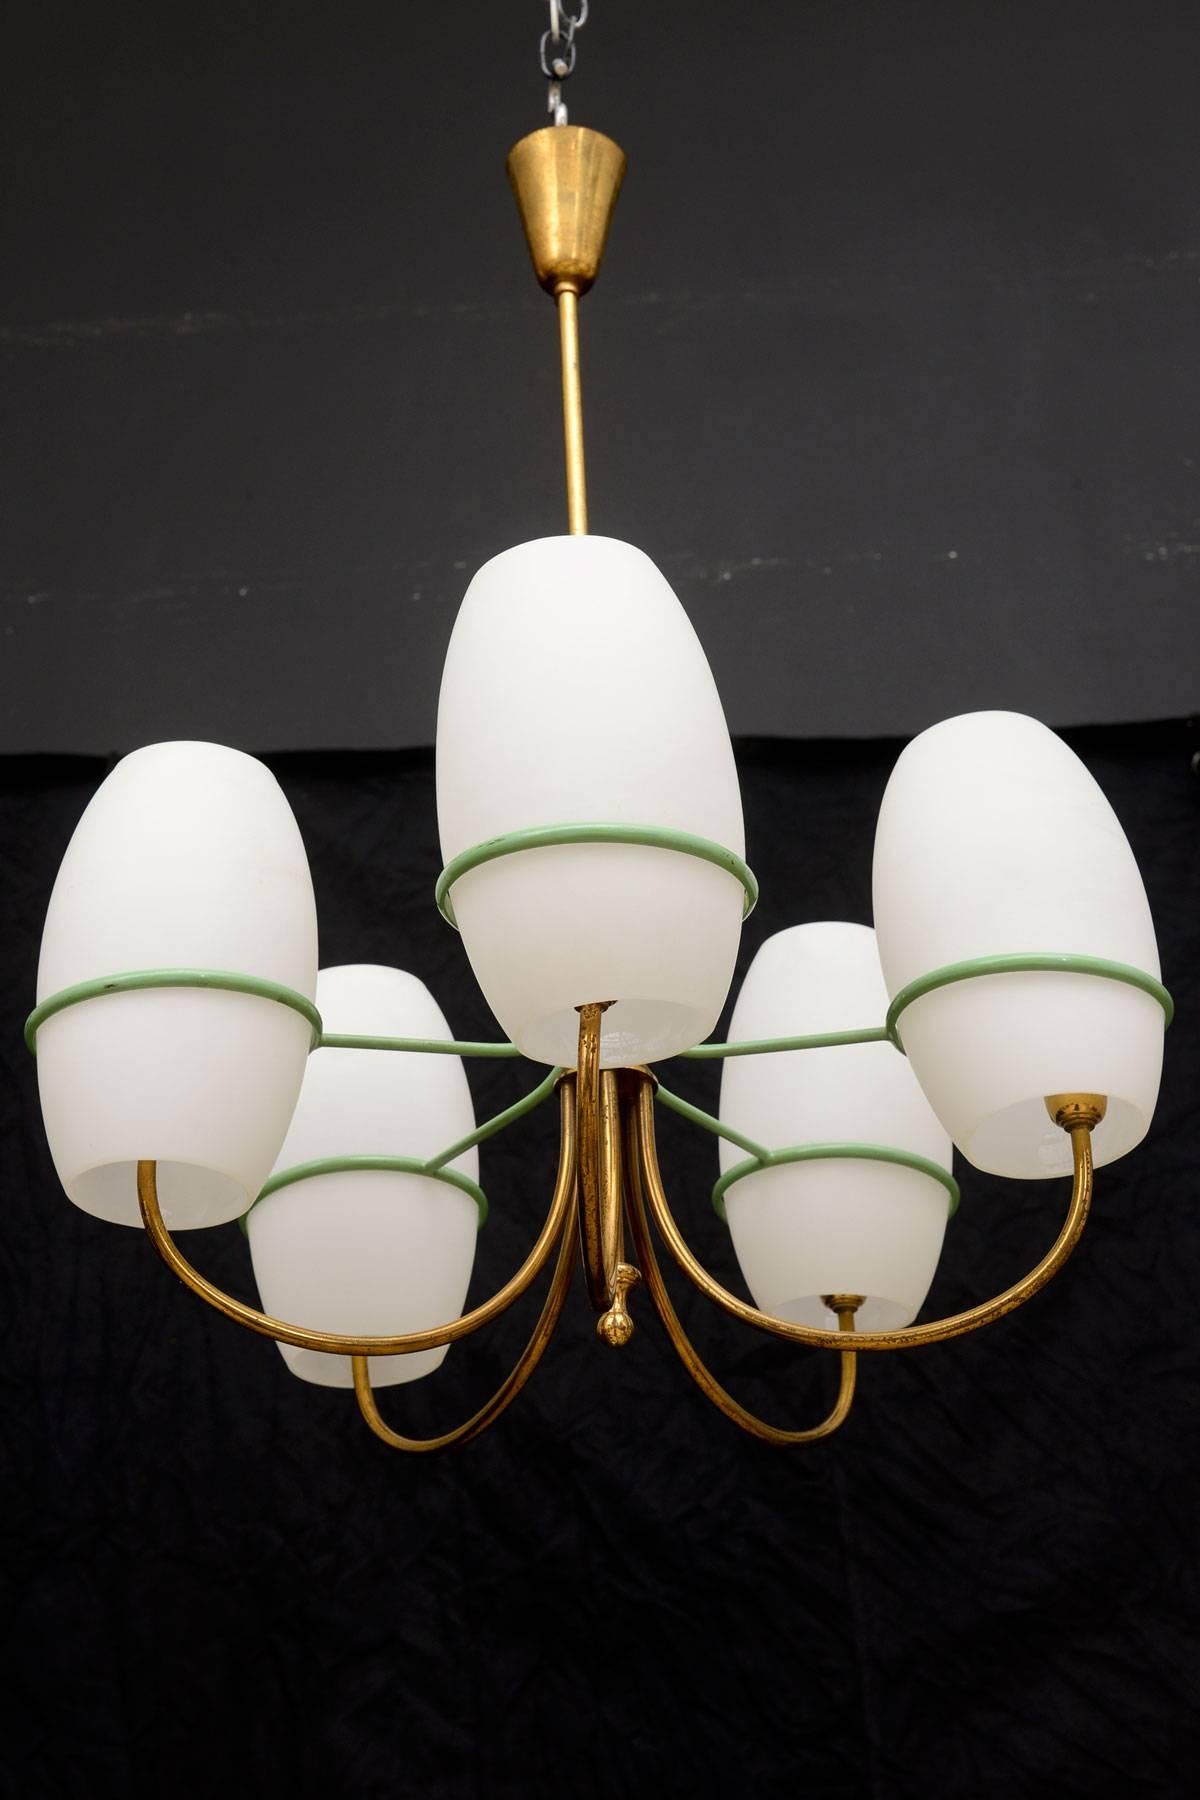 Vintage Mid-Century Italian chandelier with green enamel holders for the opaline shades. The fixture has five sockets and has been professionally rewired to US standards.